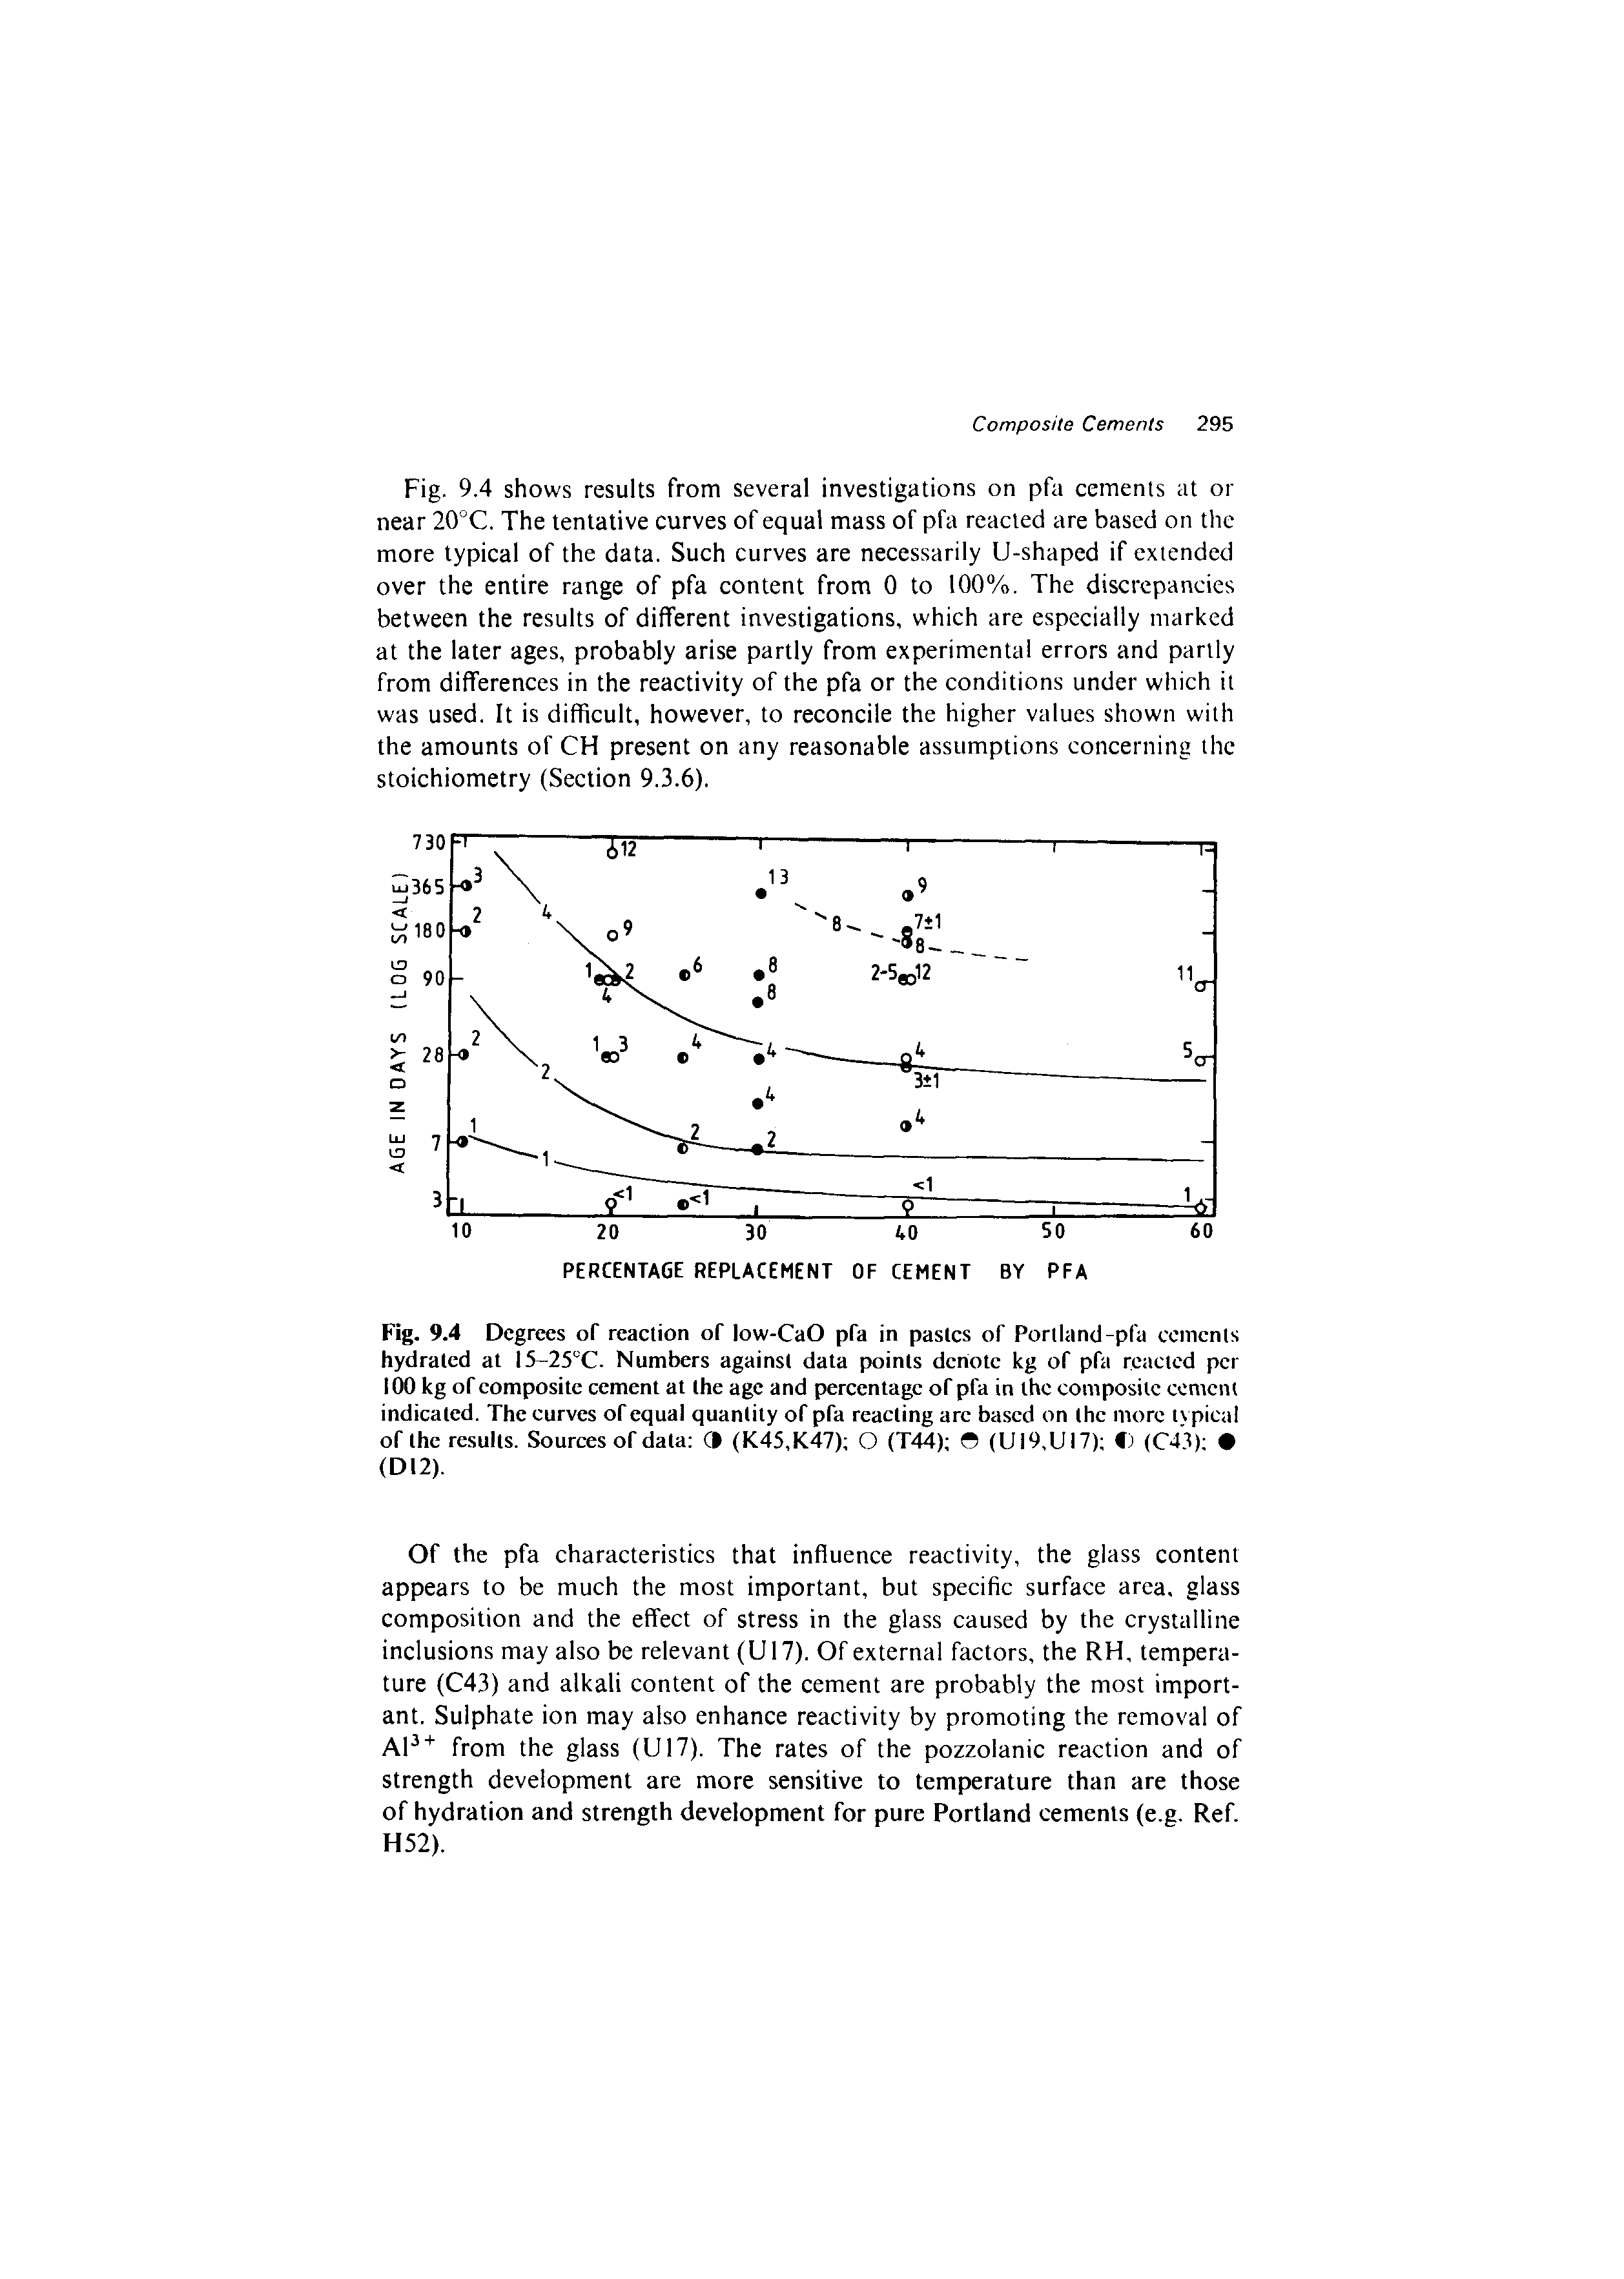 Fig. 9.4 Degrees of reaction of low-CaO pfa in pastes of Portland-pfa cements hydrated at l5-25°C. Numbers against data points denote kg of pfa reacted per 100 kg of composite cement at the age and percentage of pfa in the composite cement indicated. The curves of equal quantity of pfa reacting arc based on the more typical of the results. Sources of data Cl (K45,K47) O (T44) (UI9.UI7) ) (C43) (DI2).